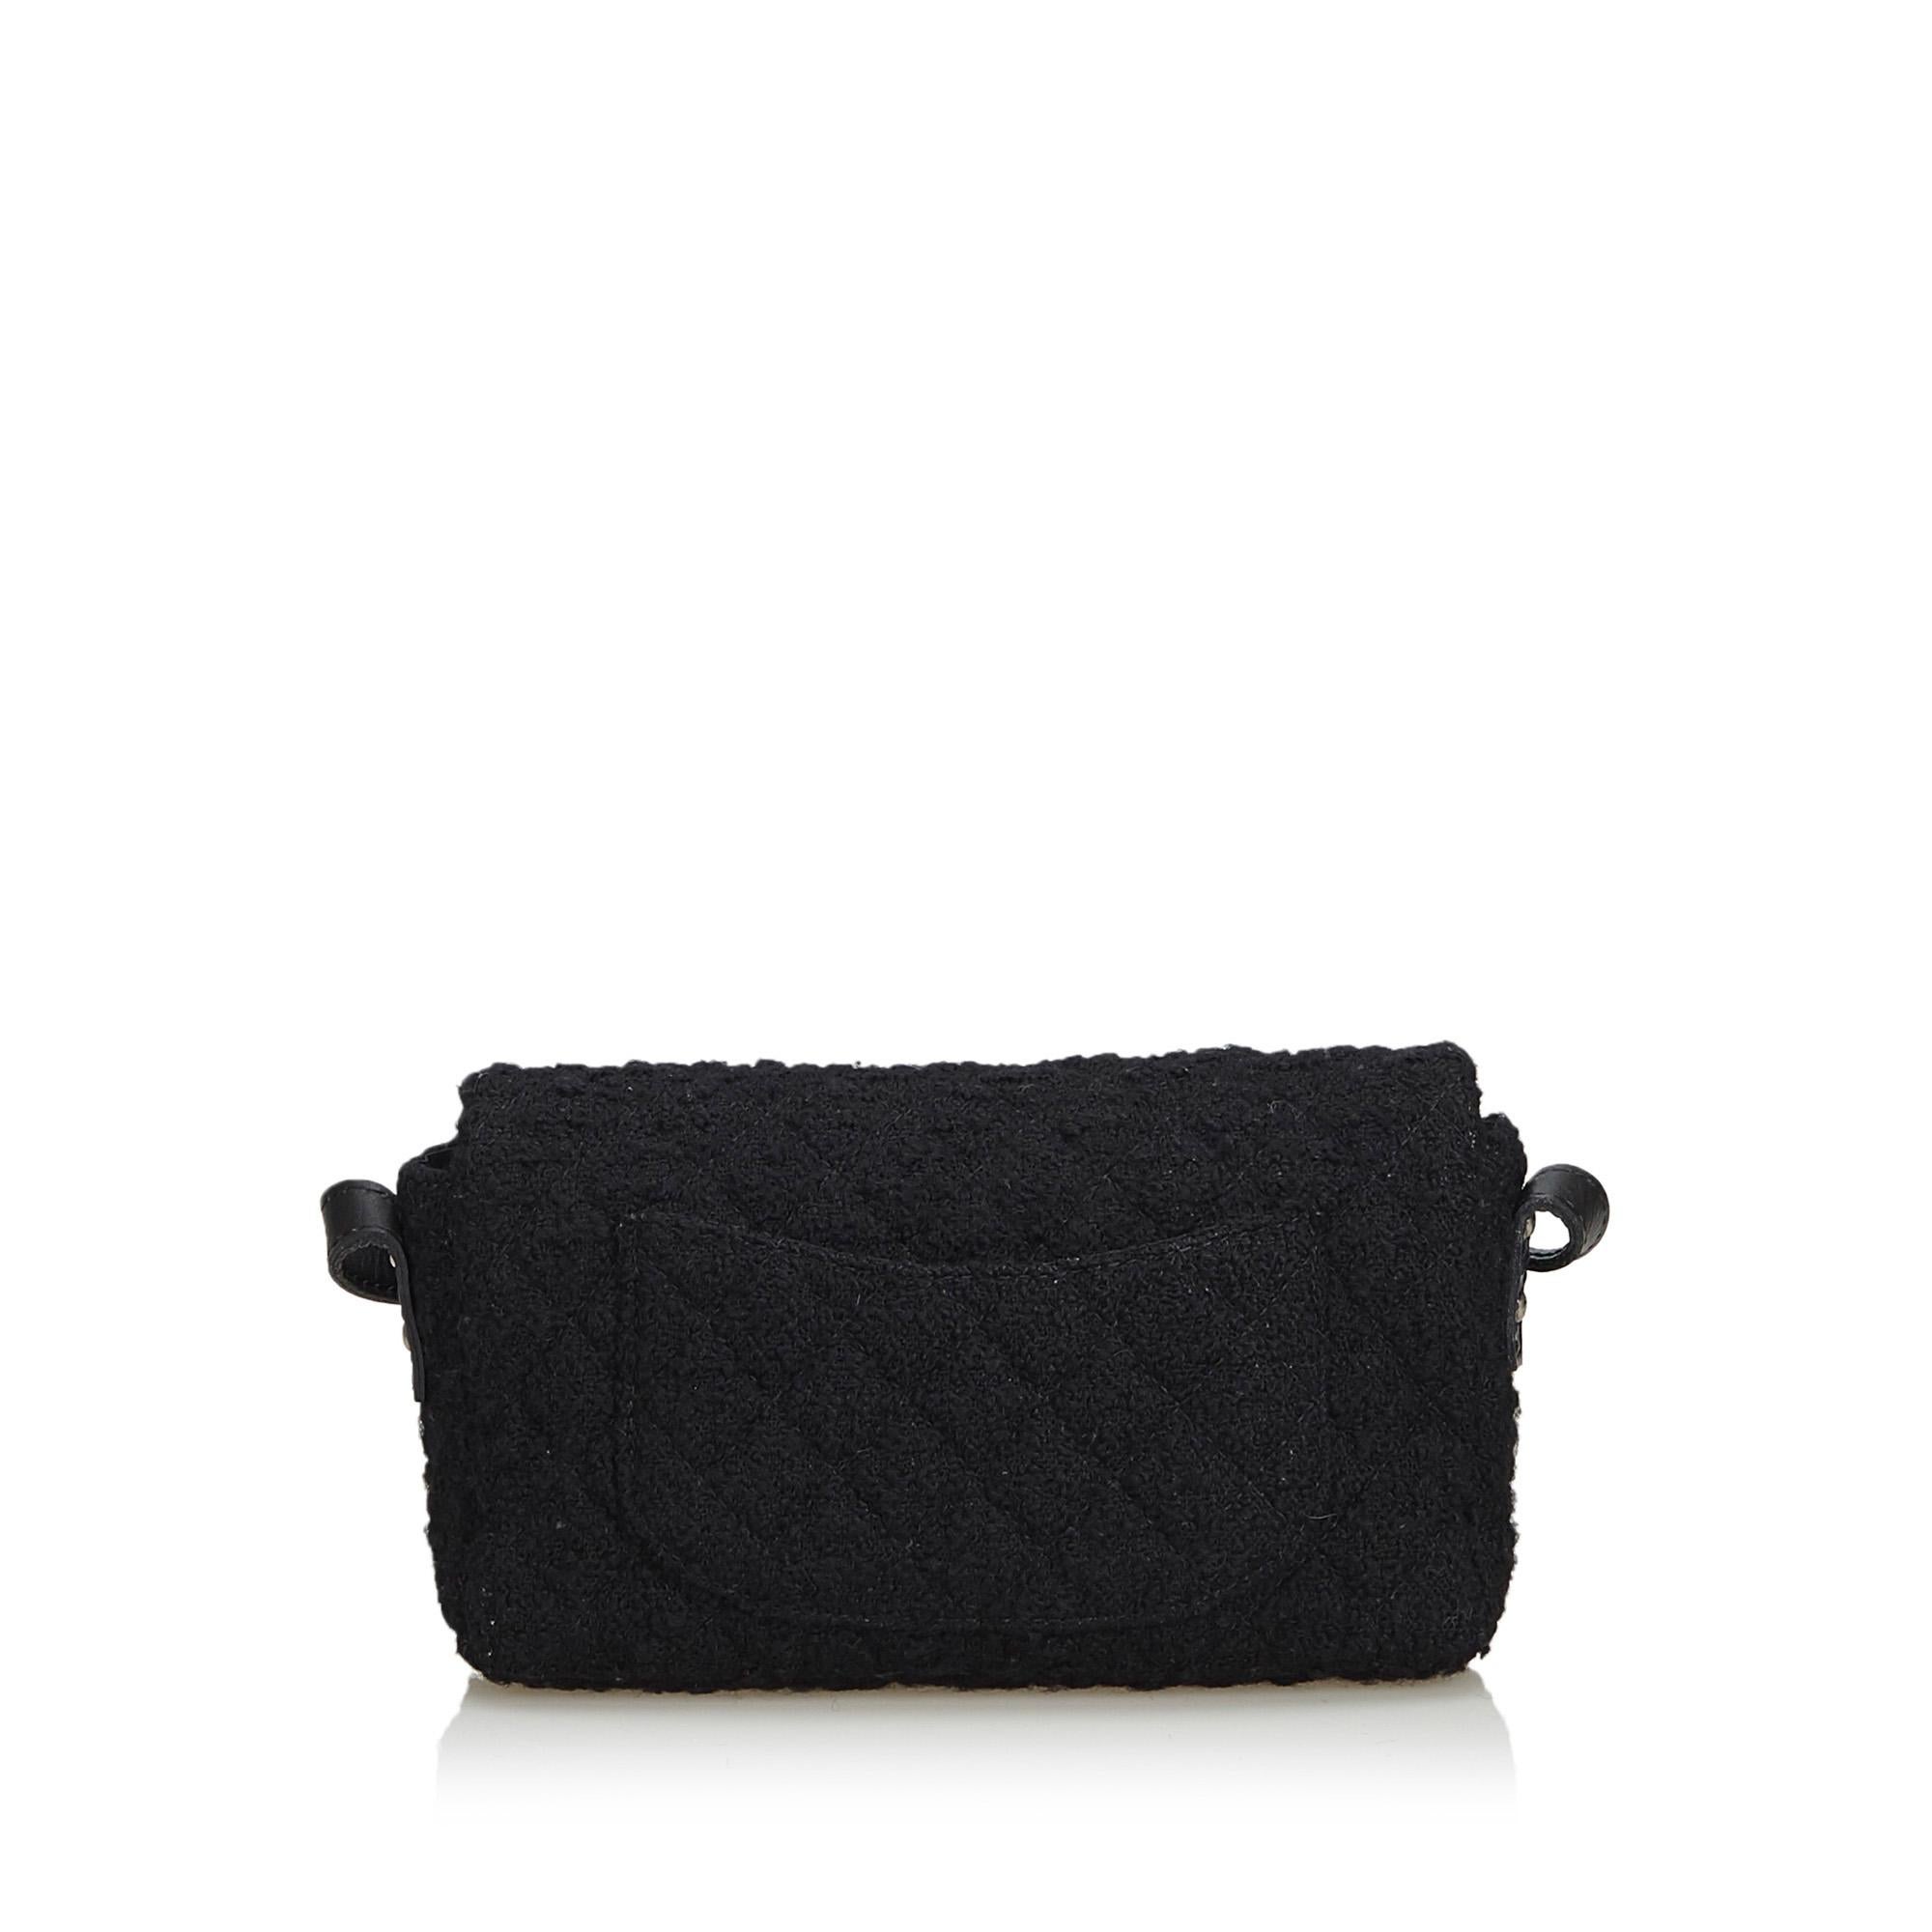 Chanel Black Wool Fabric Reissue Flap Shoulder Bag France In Good Condition For Sale In Orlando, FL